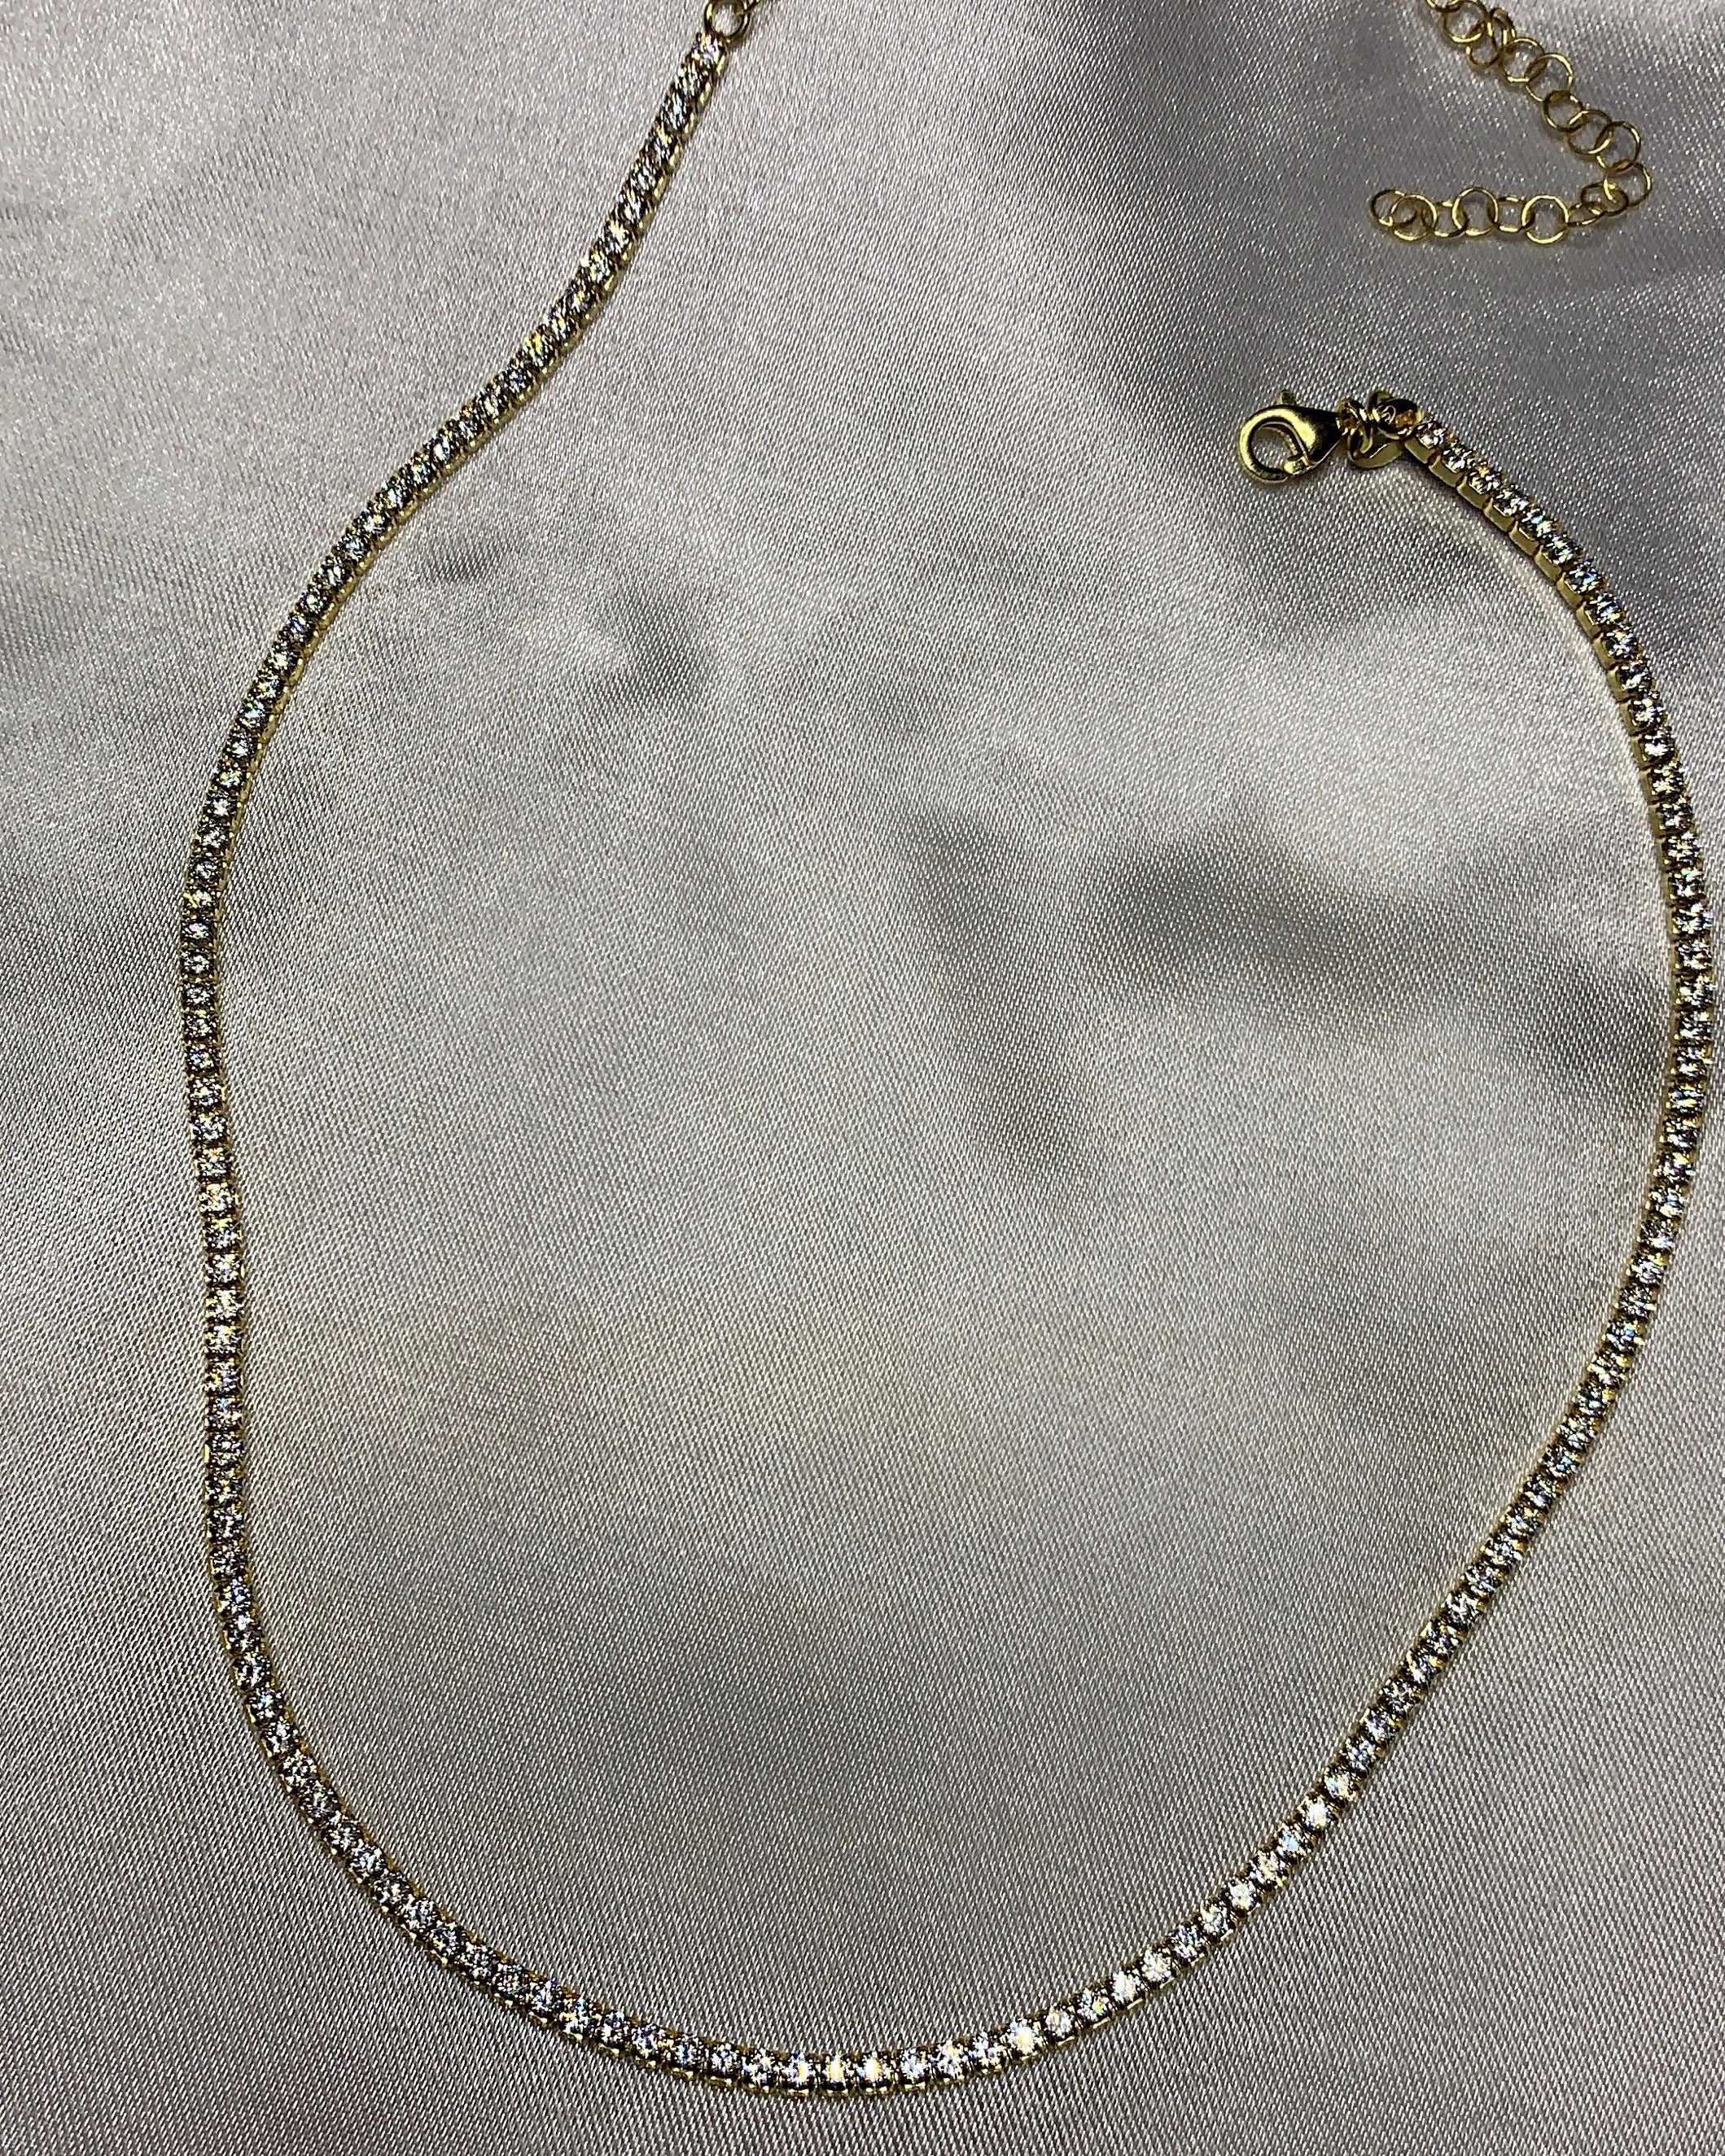 Tennis Necklace | Gold